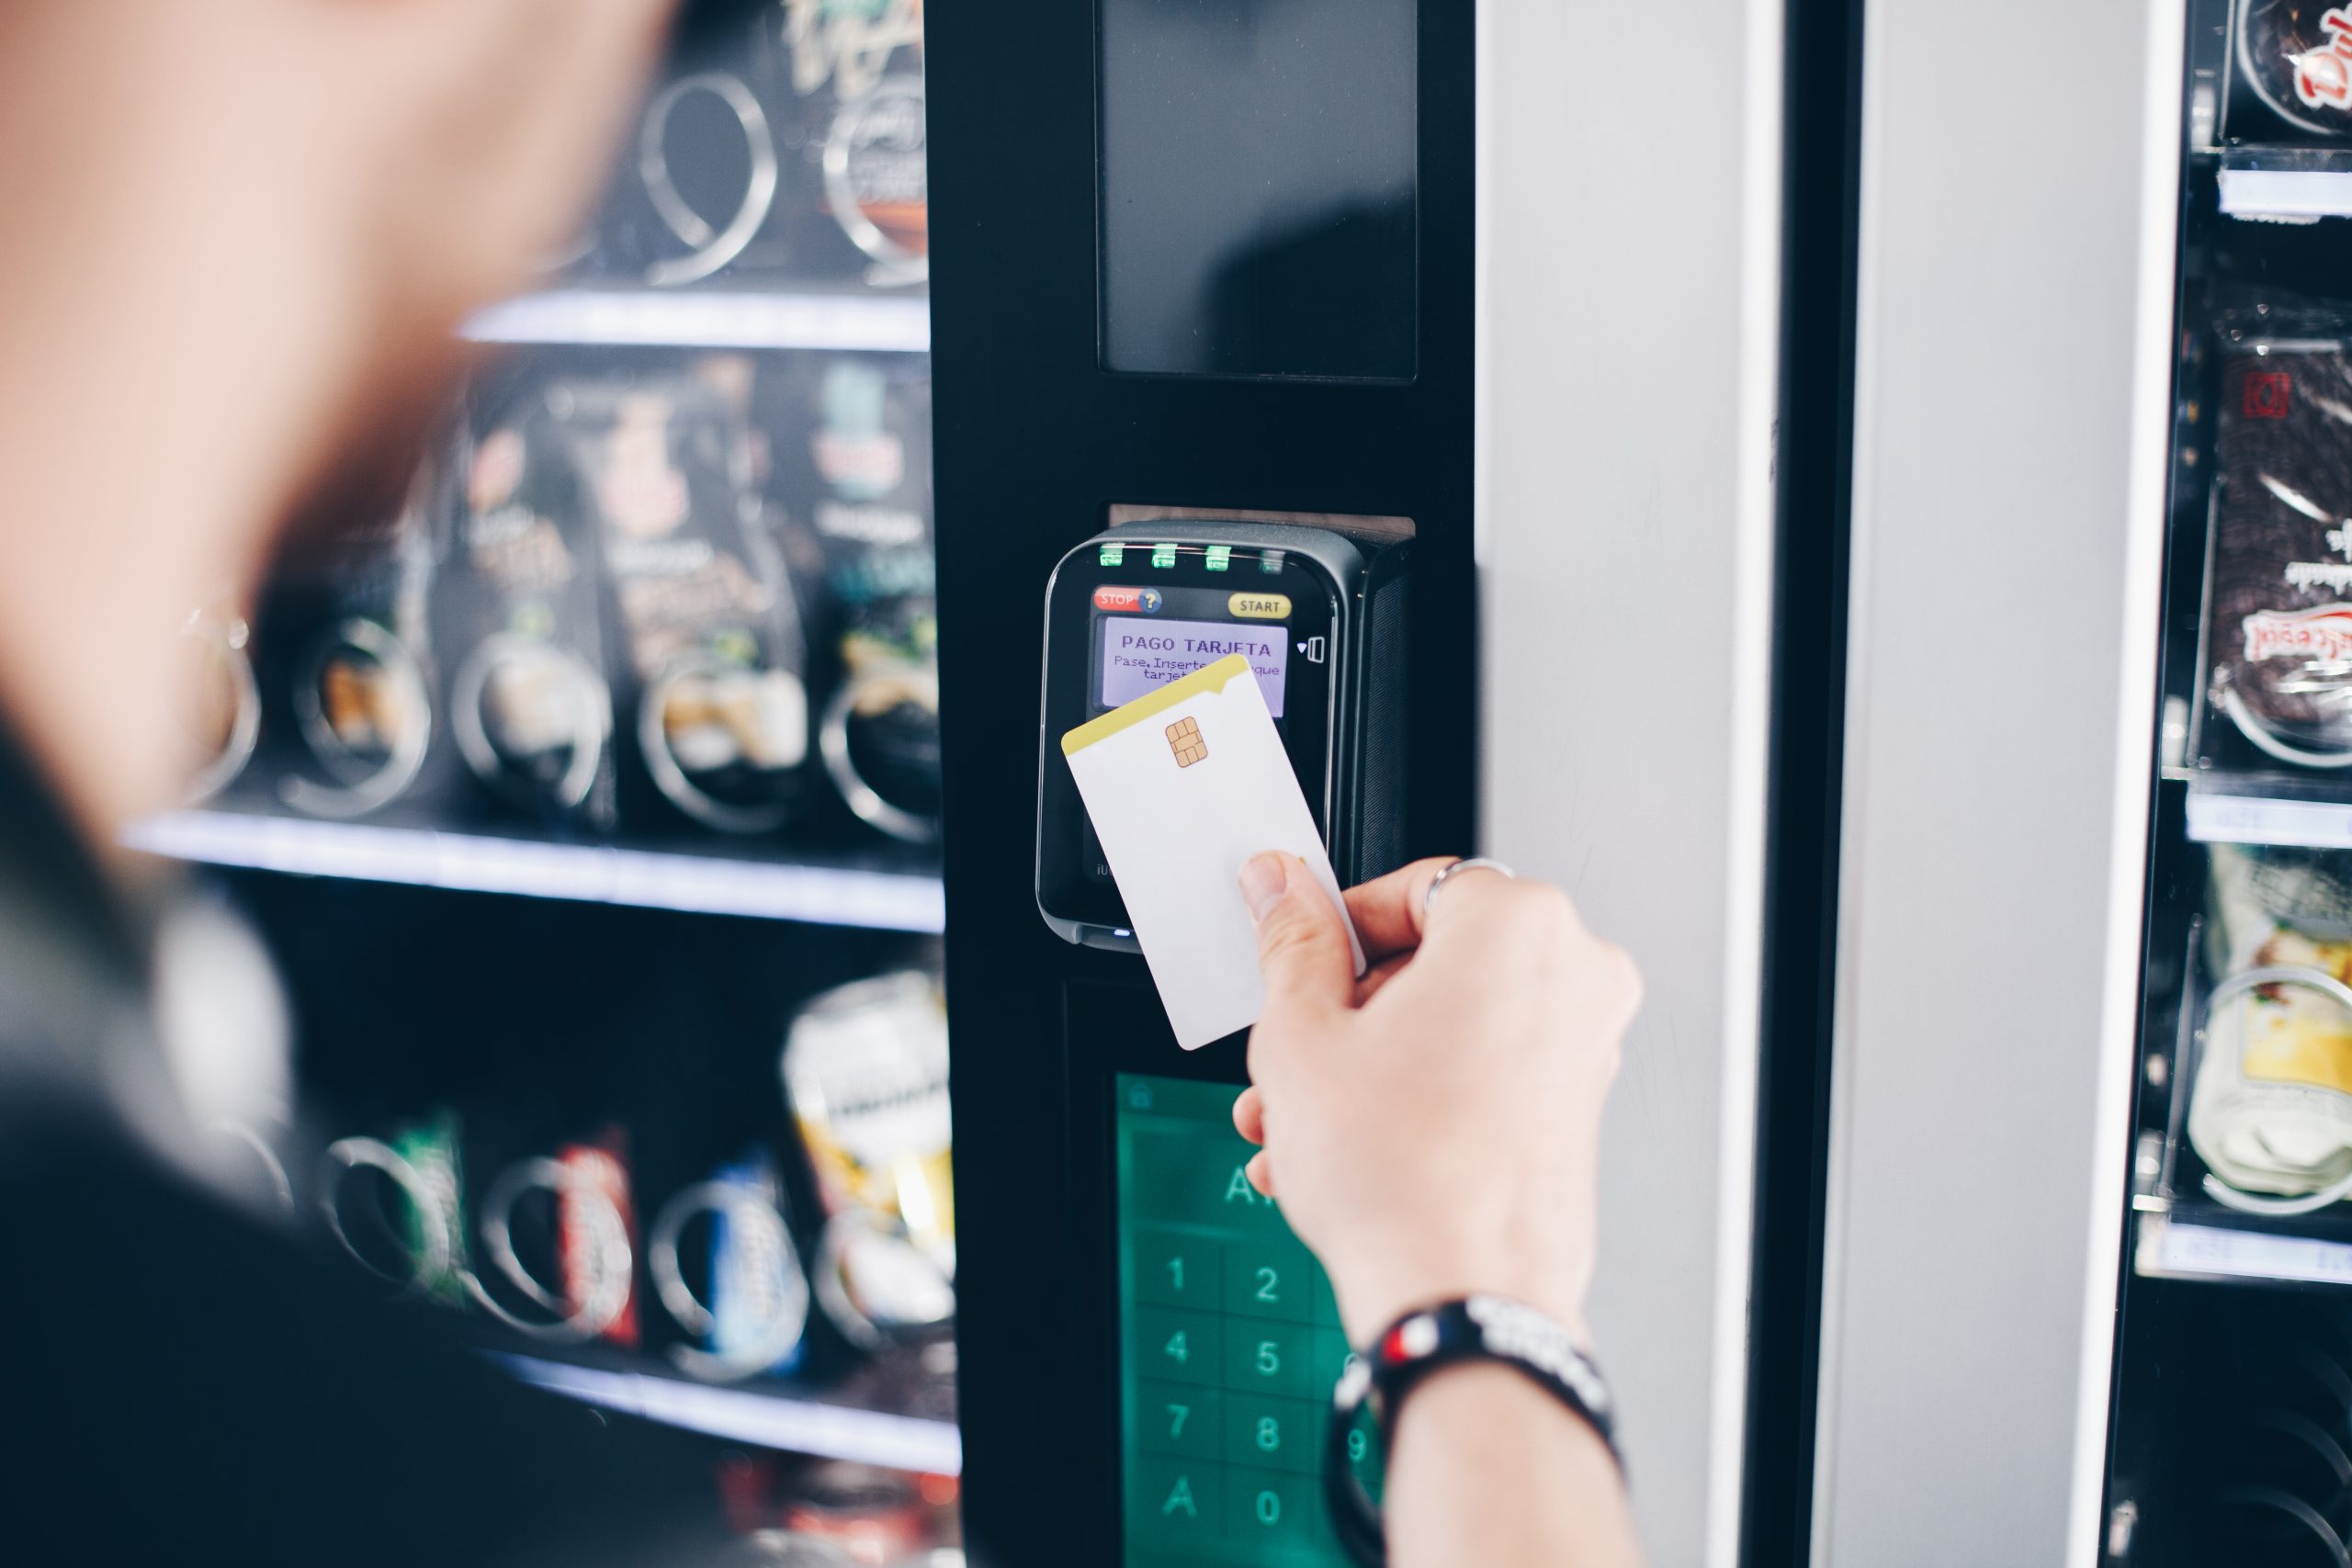 Student,Using,The,Contactless,Payment,Method,In,A,Vending,Machine.